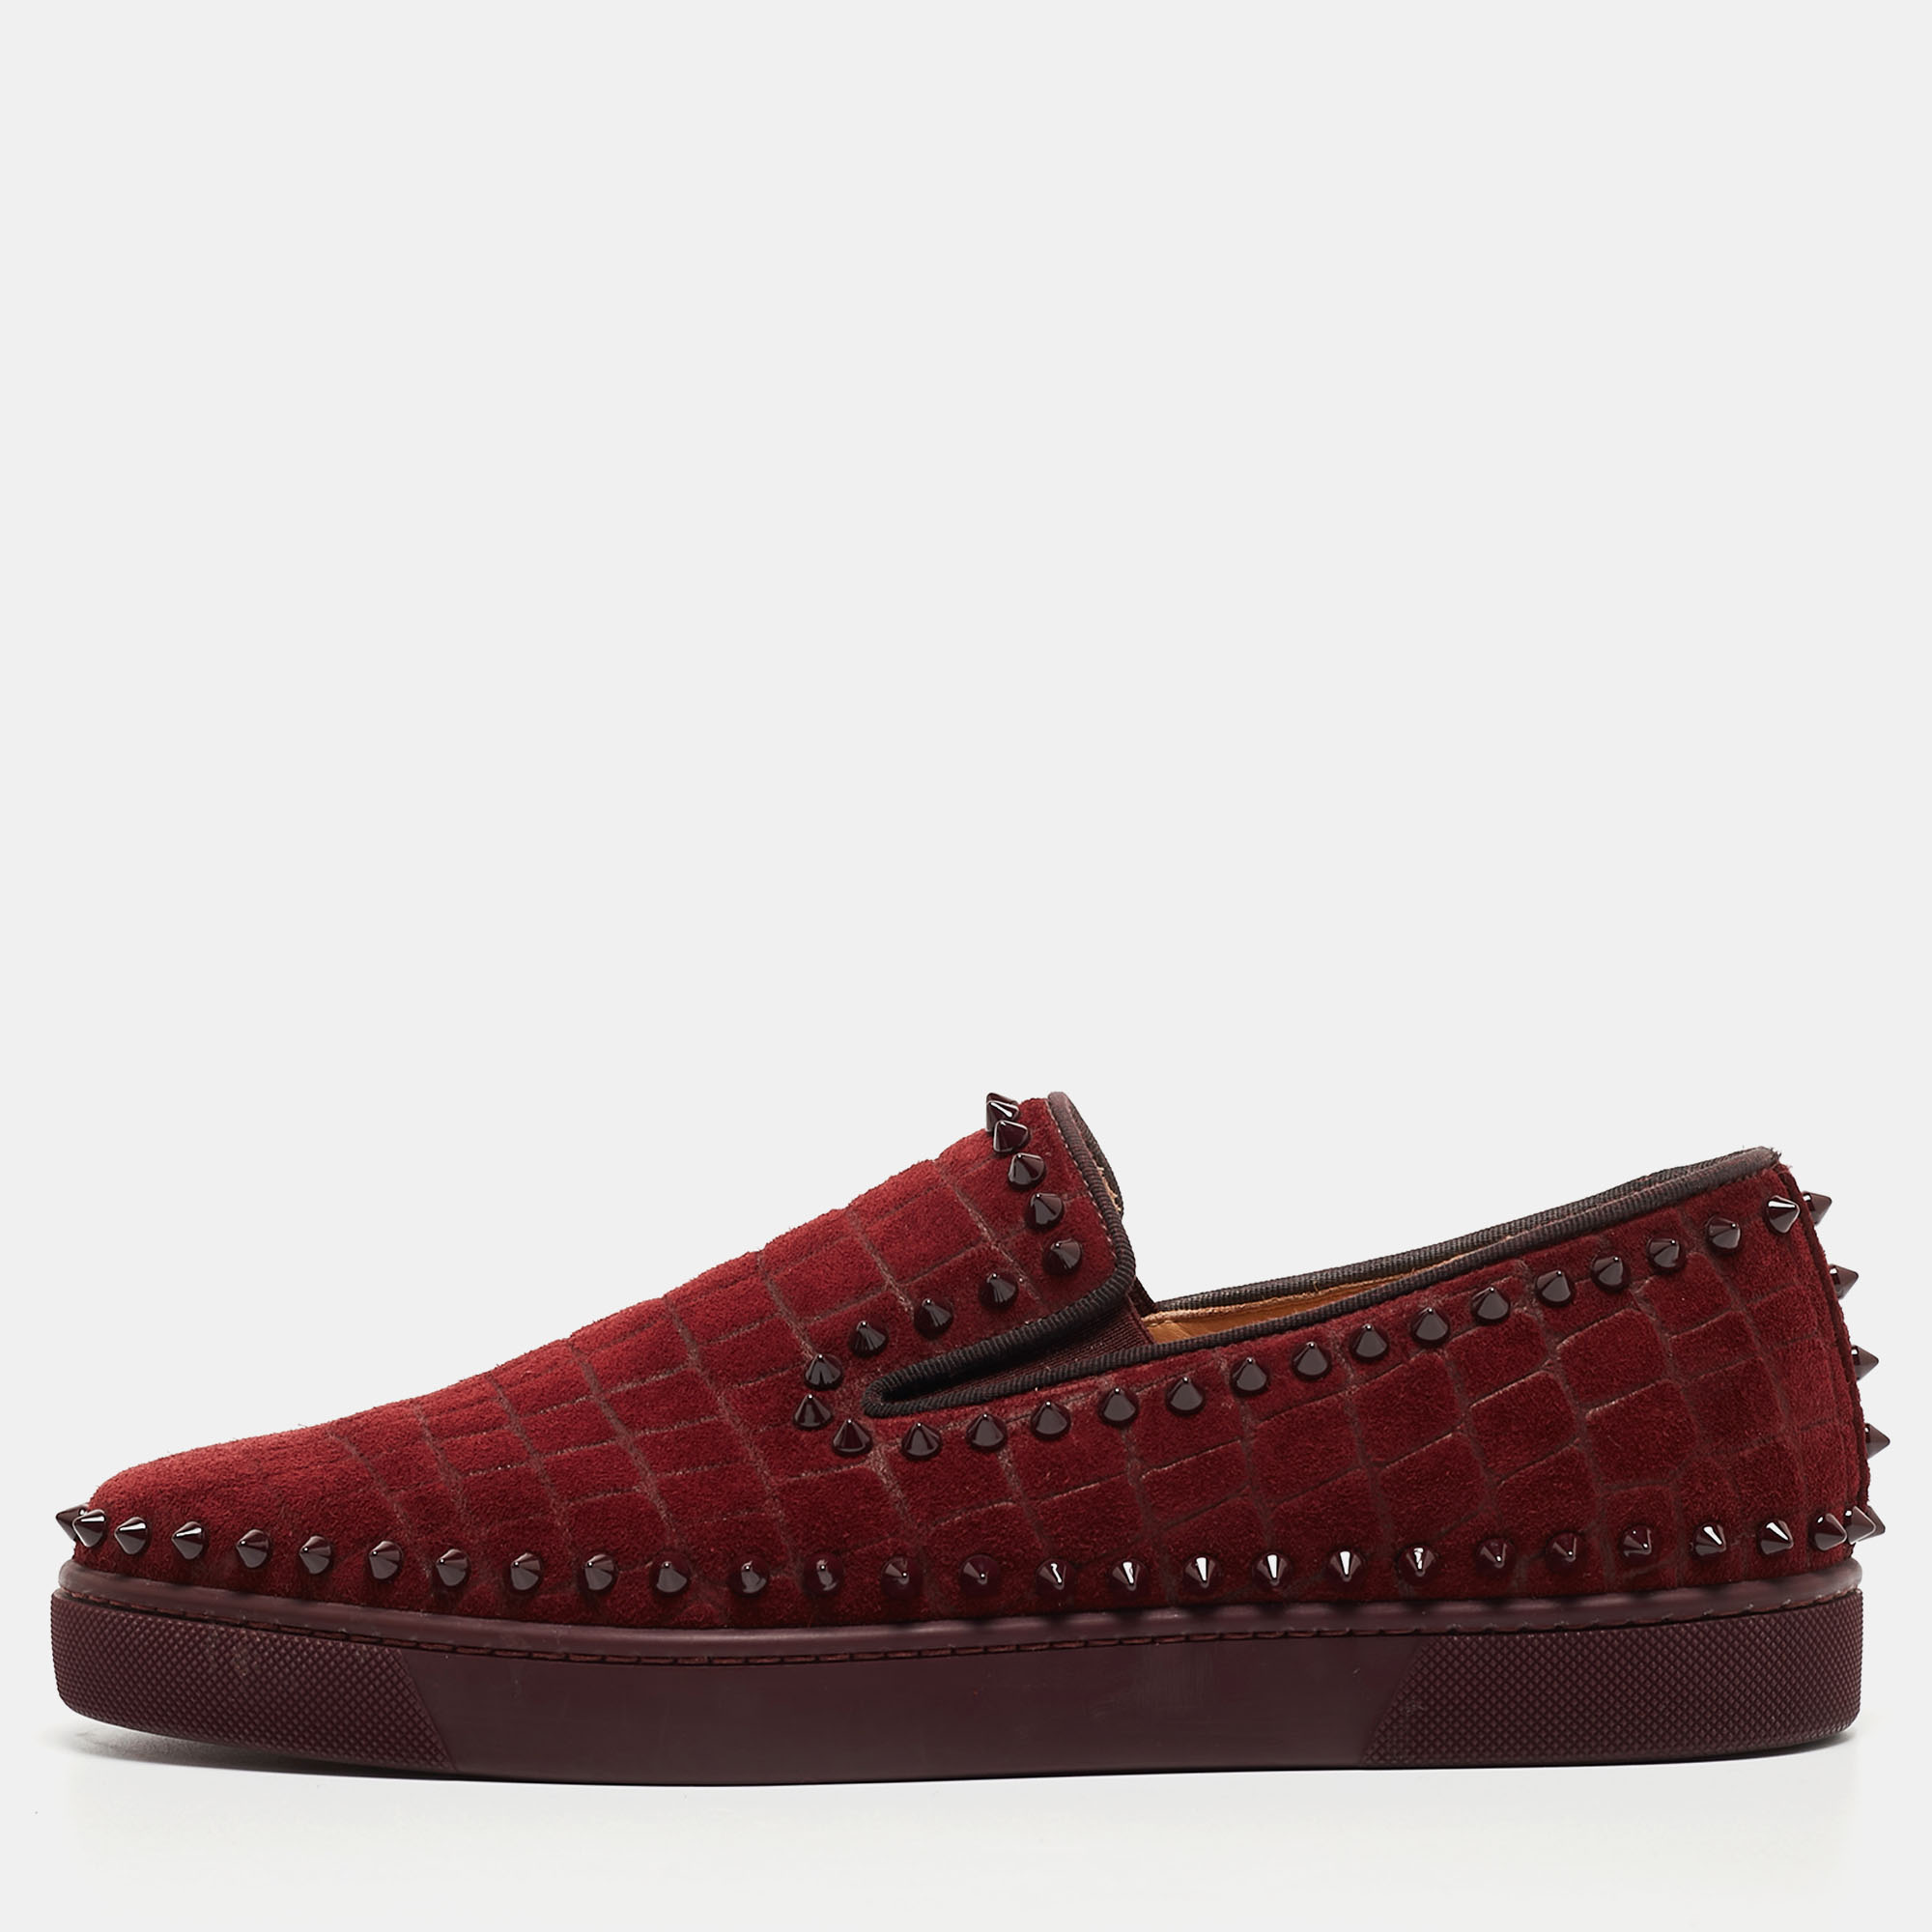 

Christian Louboutin Burgundy Suede Pik Boat Slip-On Sneakers Size